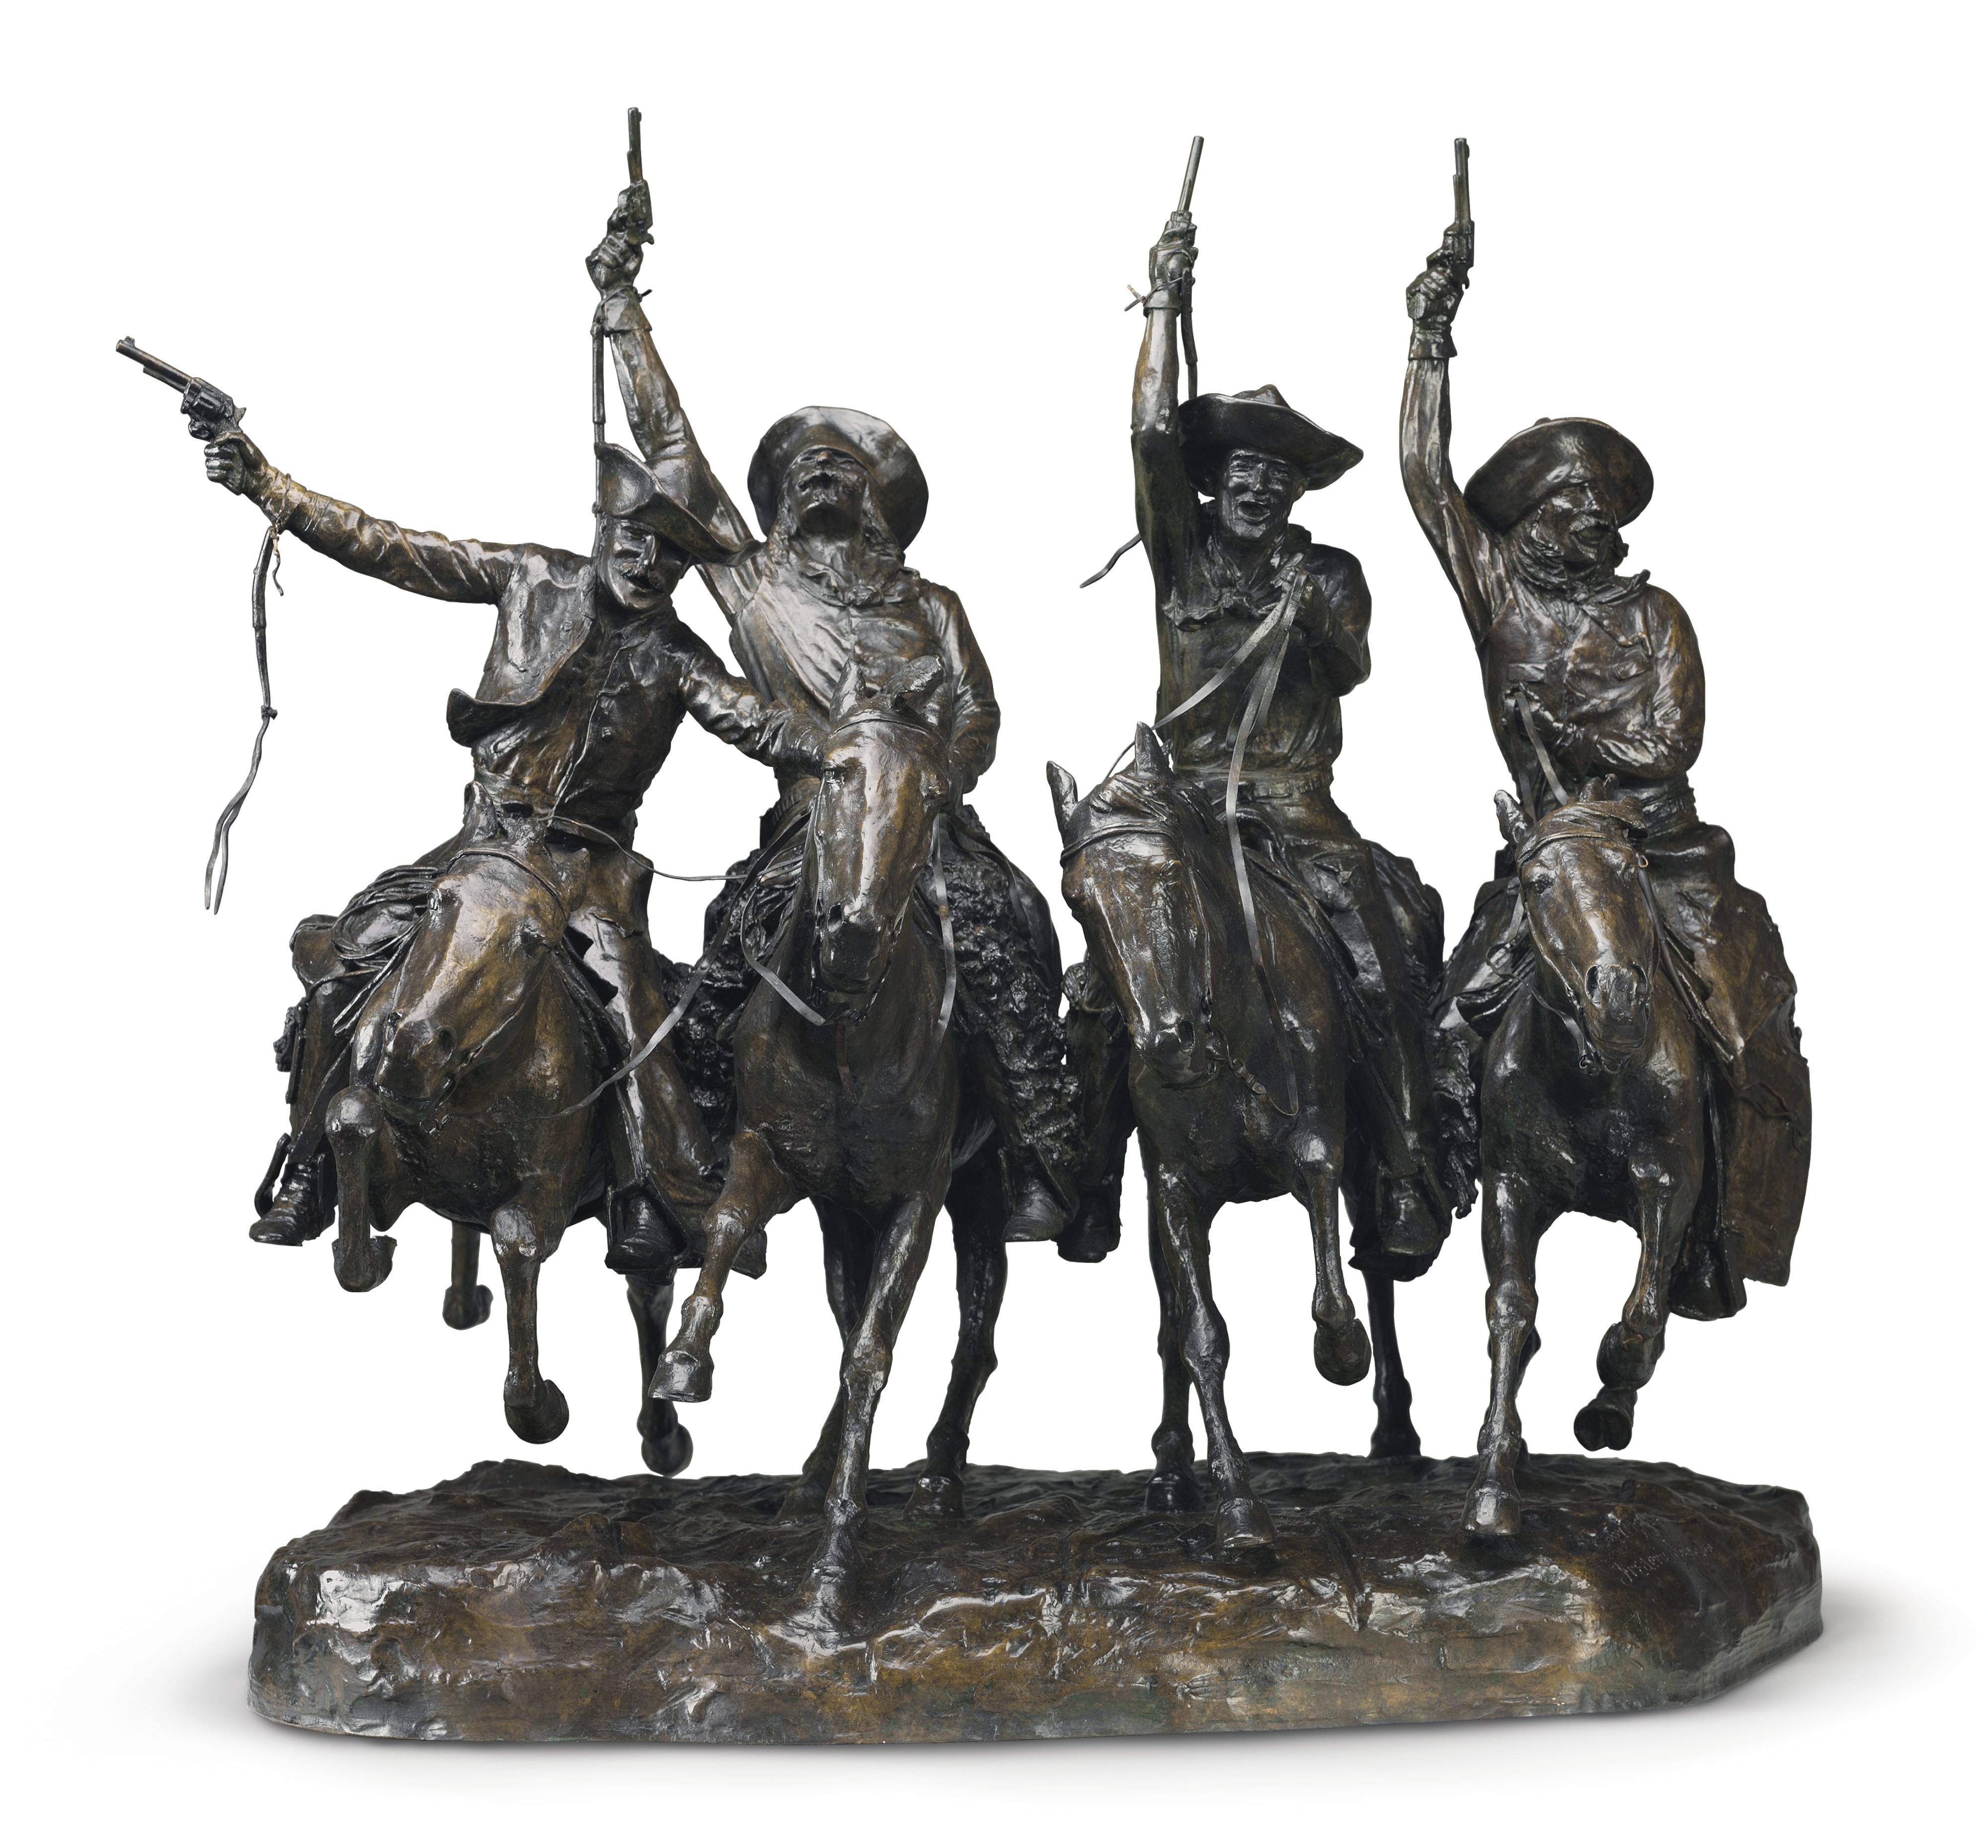 A 1906 cast of Coming Through the Rye, a bronze by Frederic Remington. Christie's sold it in May 2017 for $11.2 million against an estimate of $7 million to $10 million. It set a world record for the artist at auction as well as a record for an American sculpture that predates World War II.